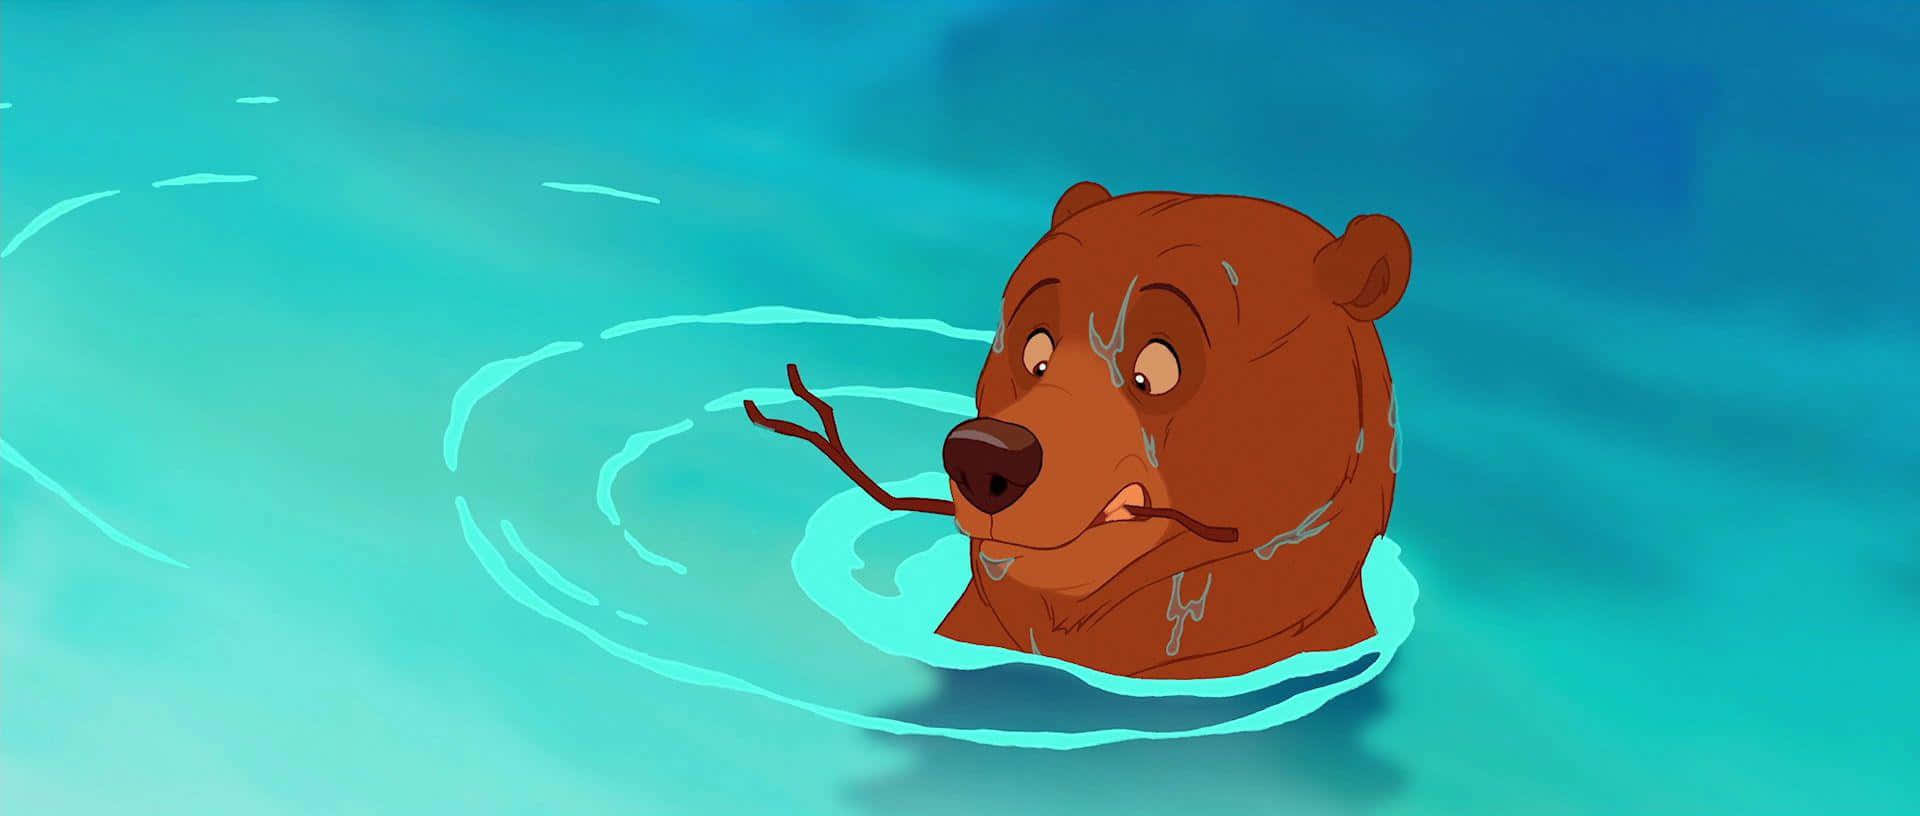 Enjoying the company of nature in Brother Bear